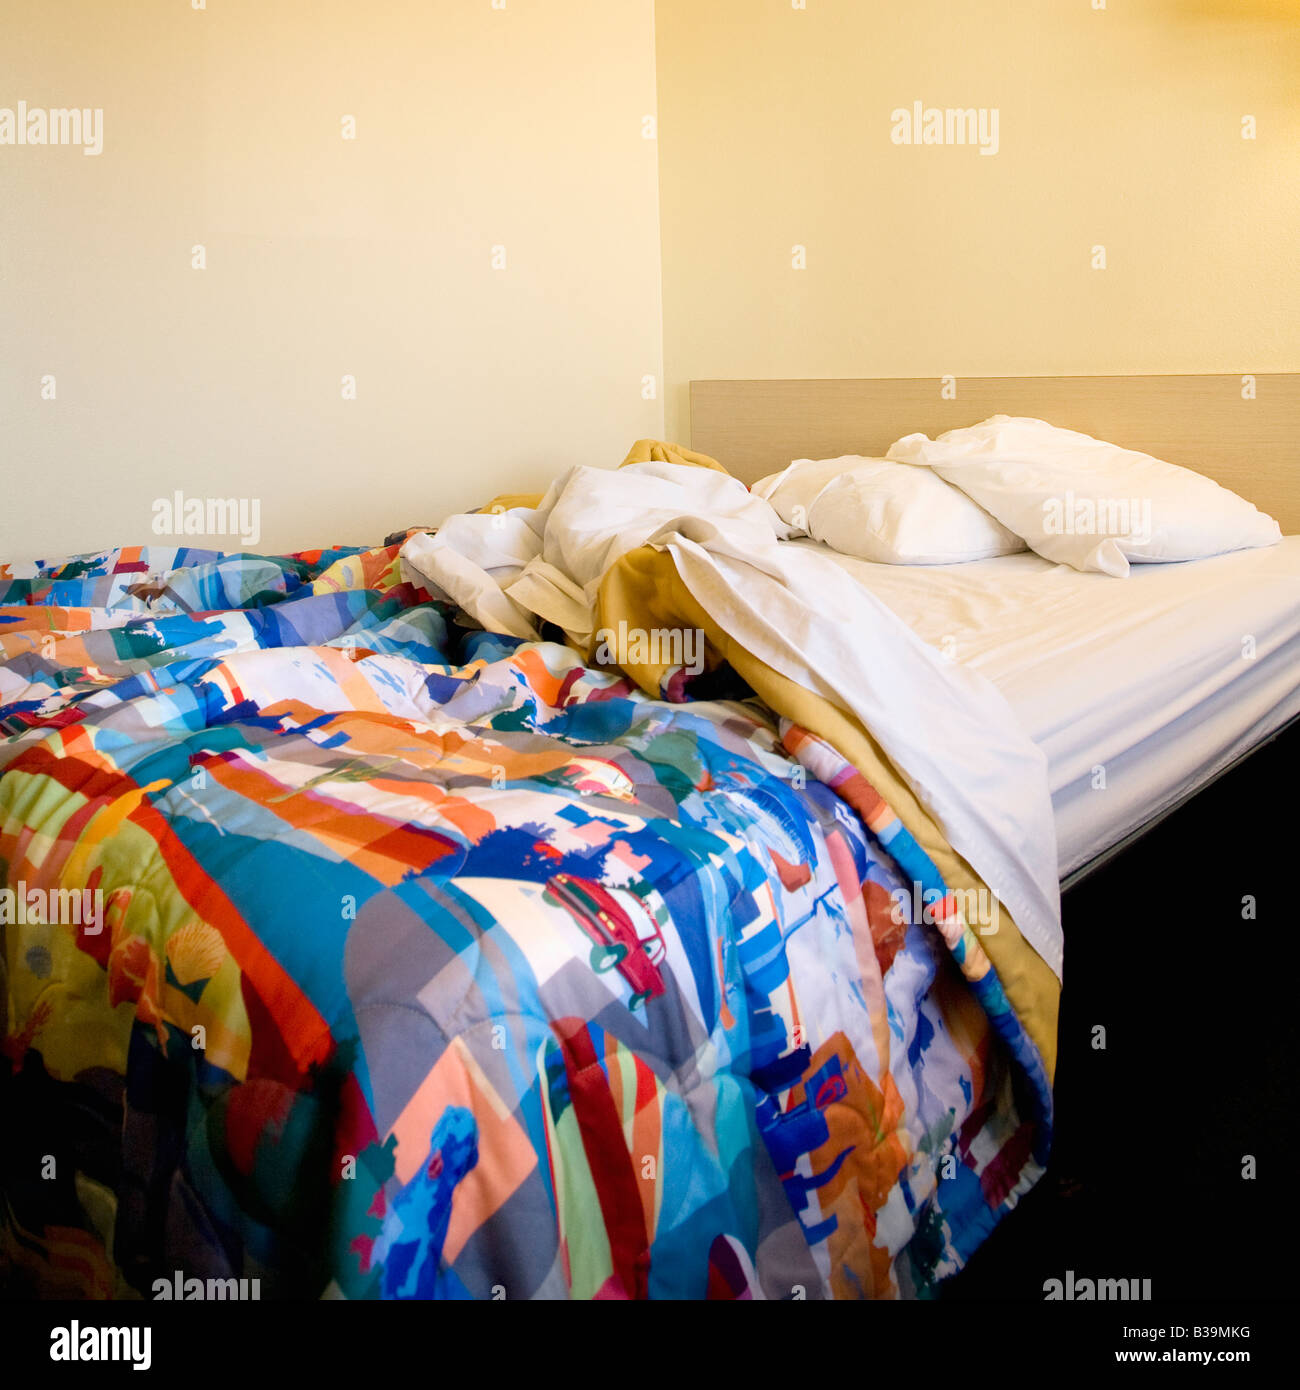 Interior shot of motel room with messy unmade bed Stock Photo